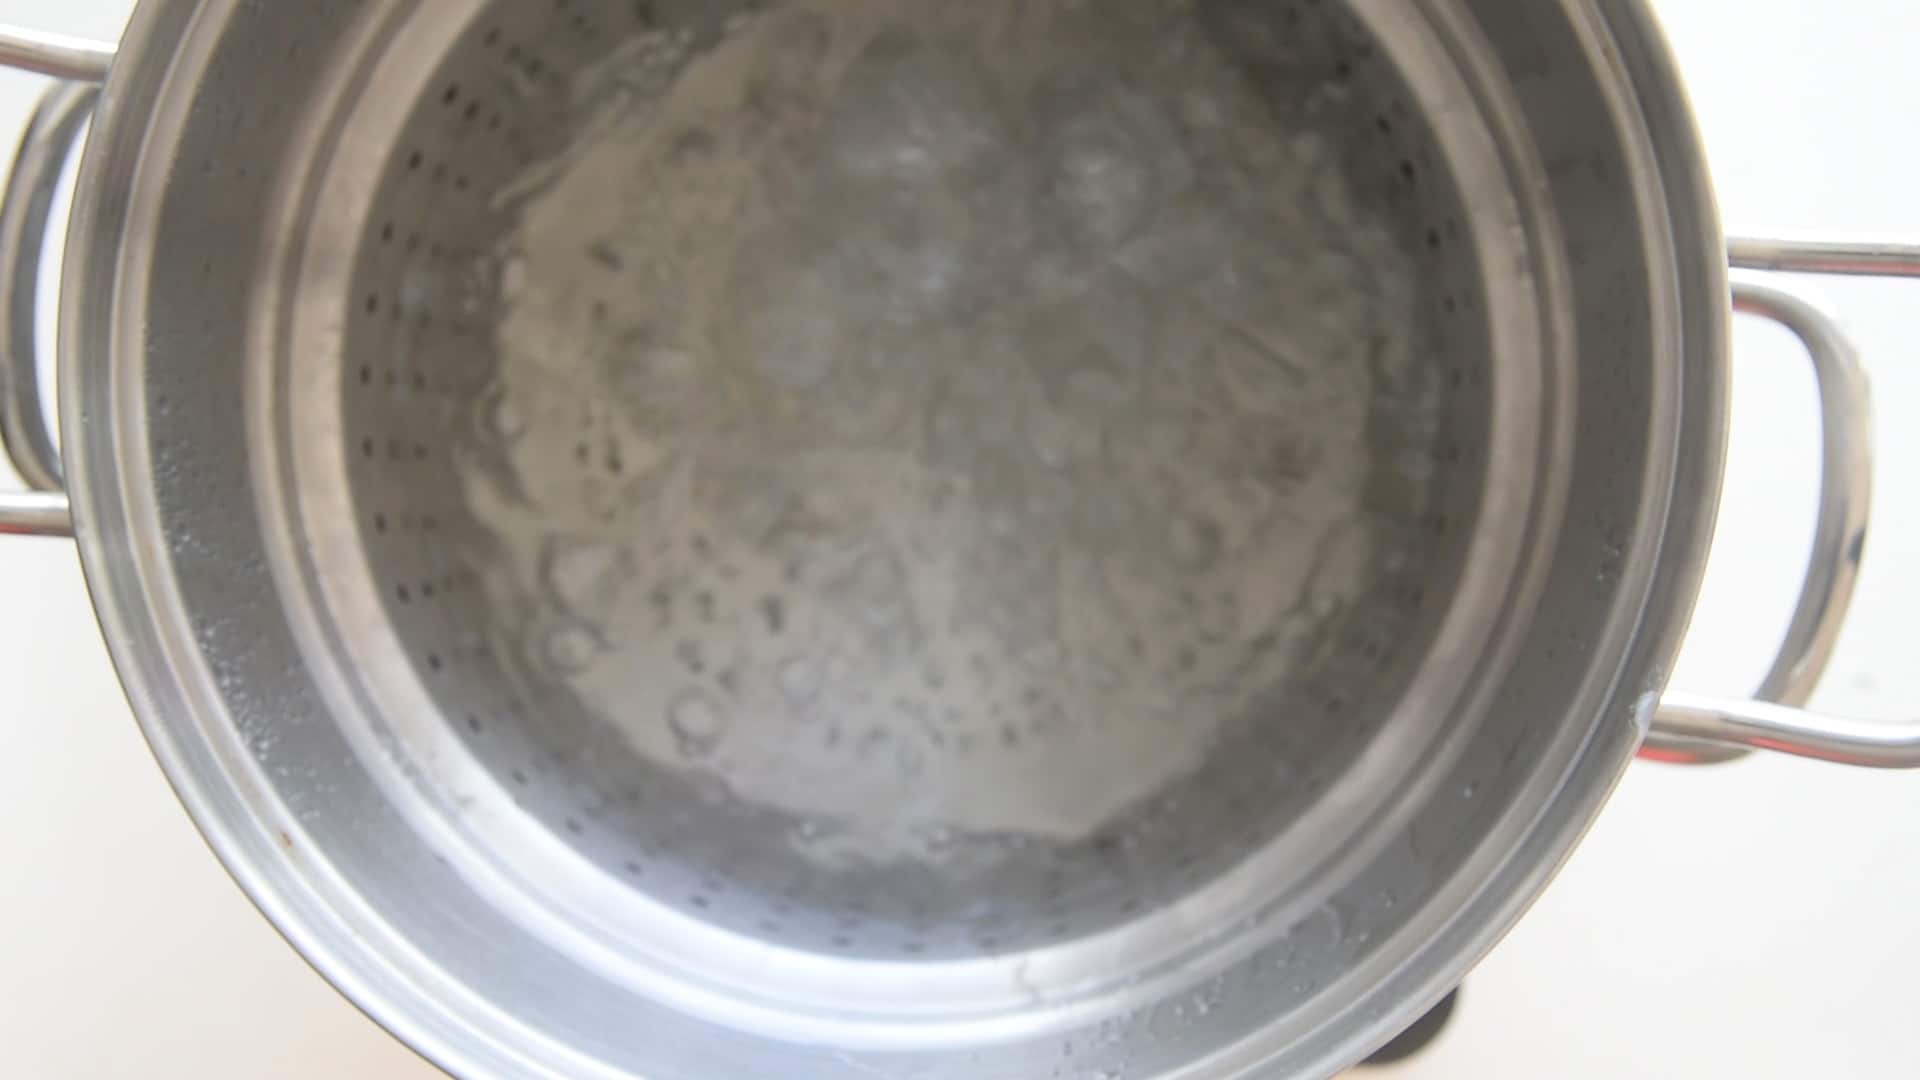 Boiling water in a large pan